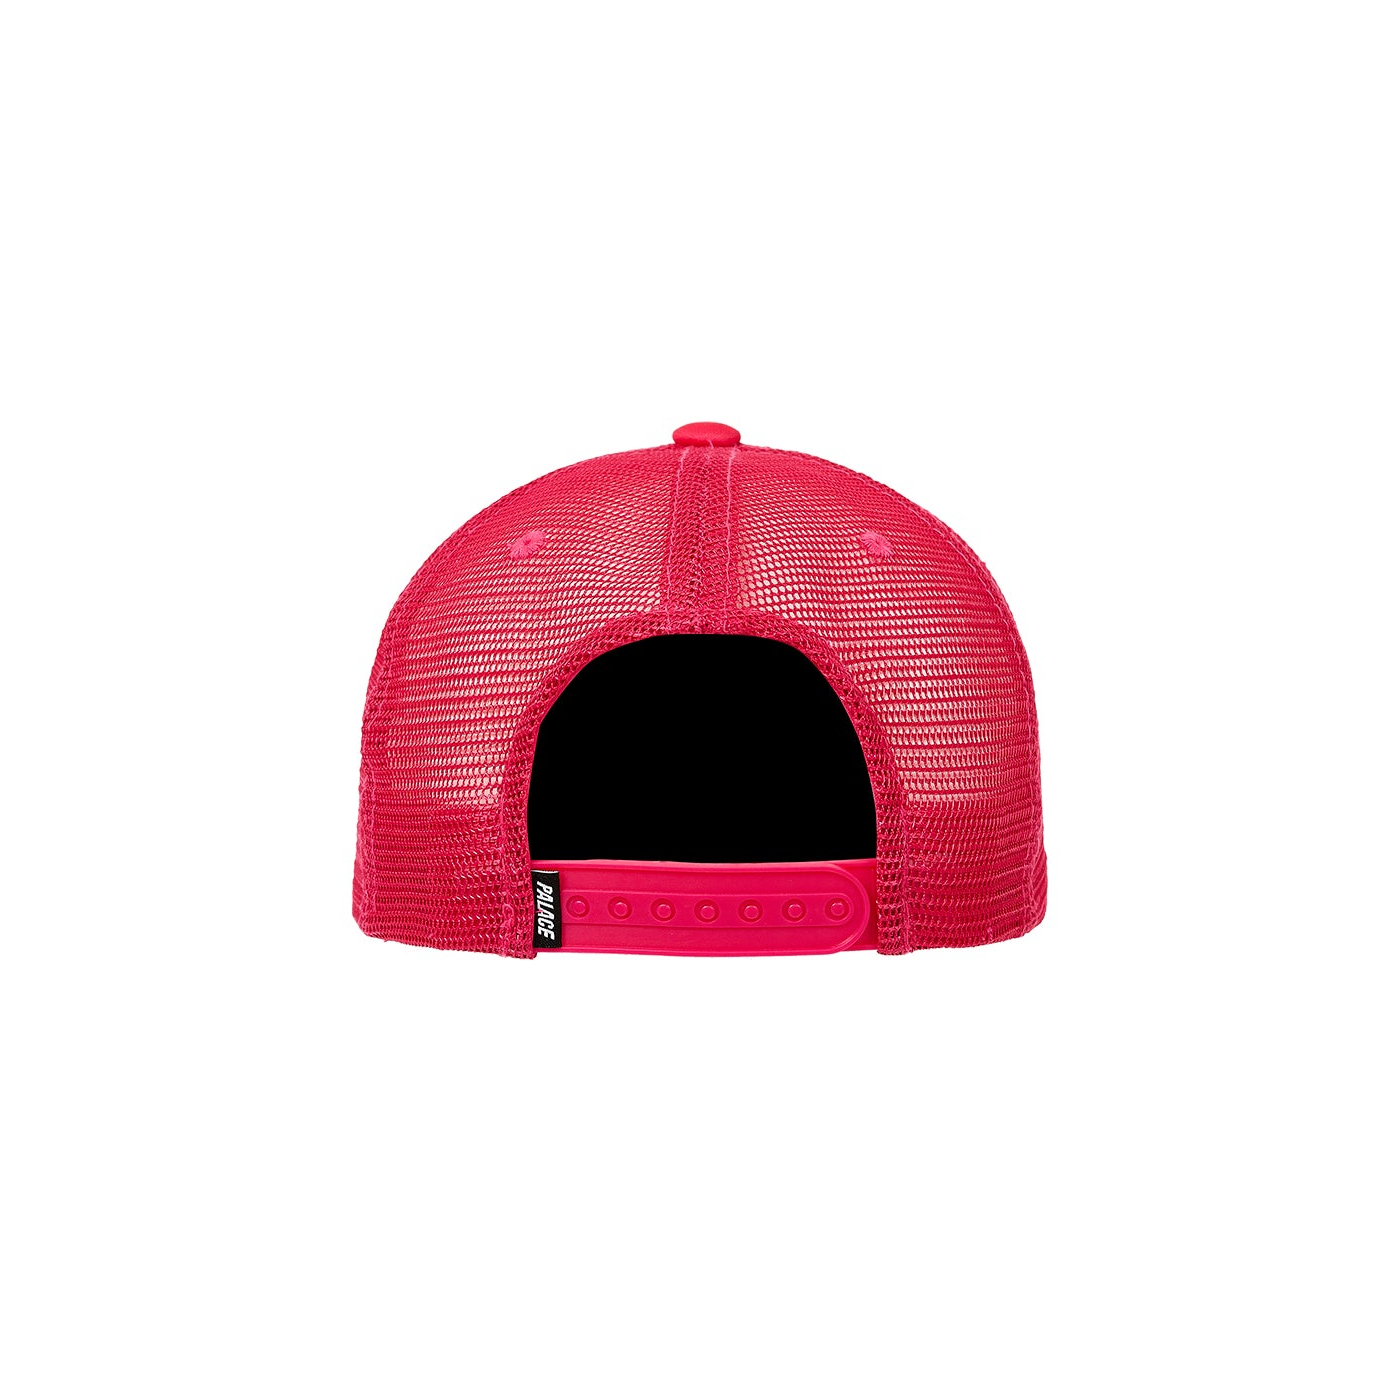 Thumbnail PALACE FOREVER TRUCKER PINK one color